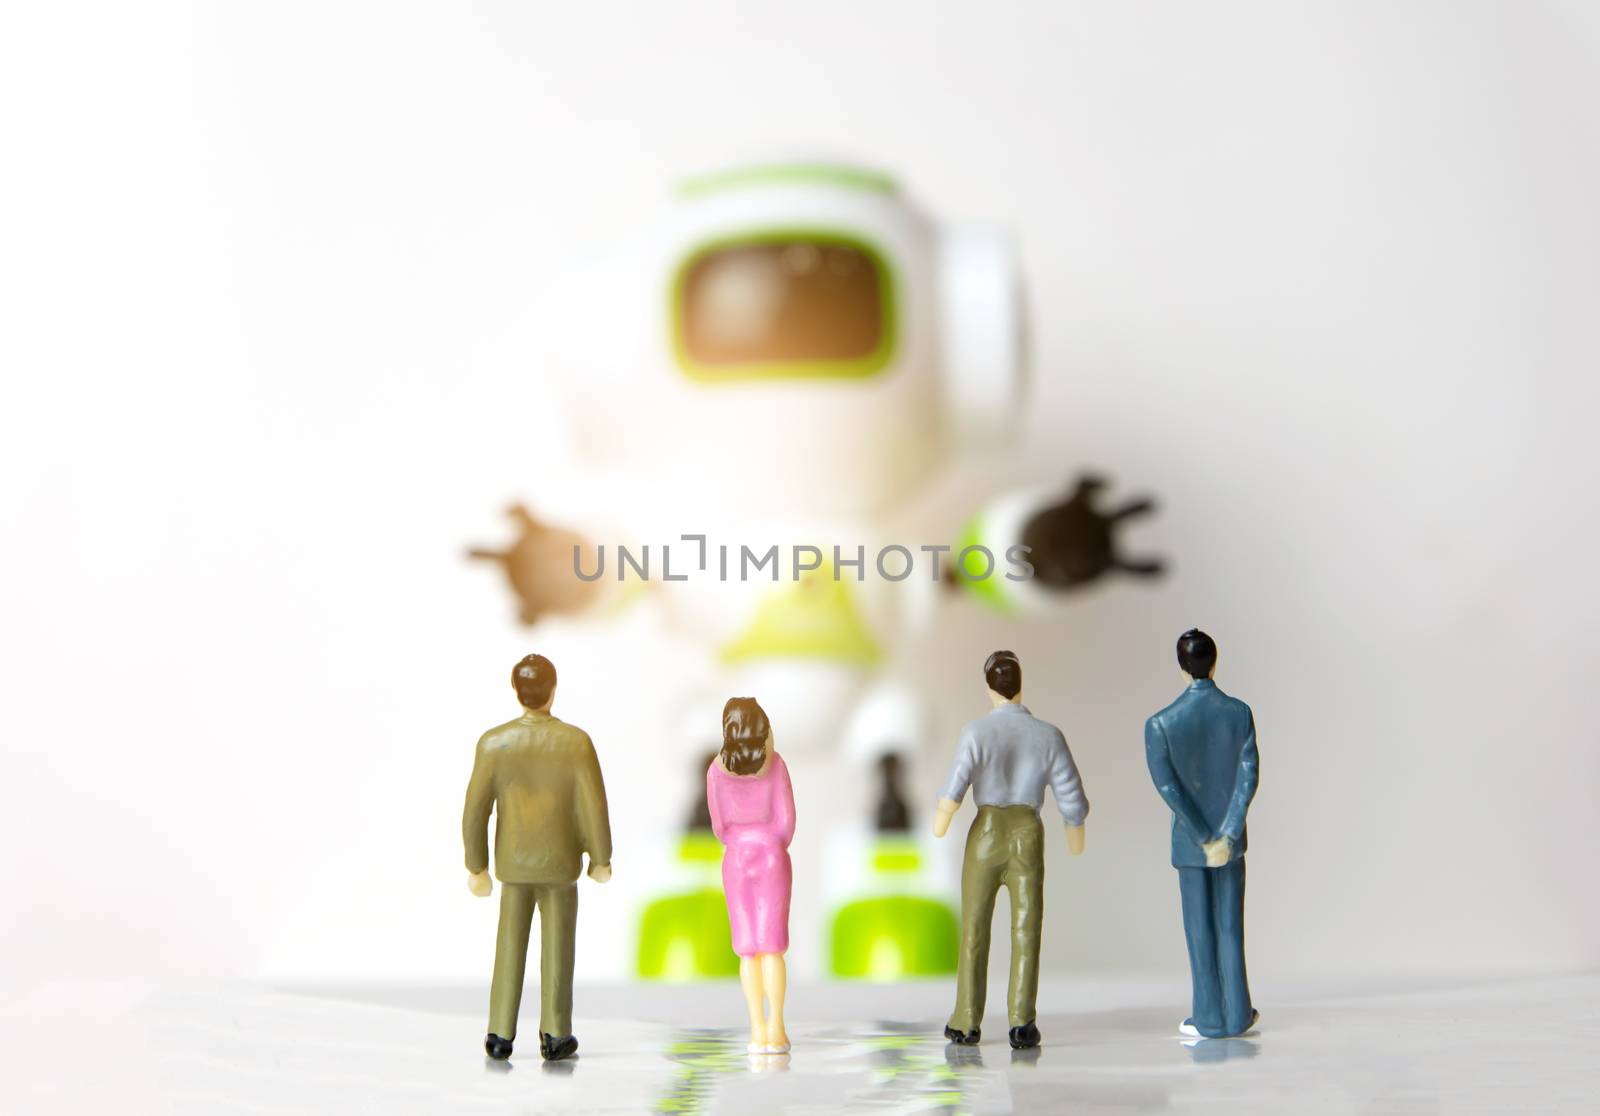 The little person businessman small stand to see robot technology by sompongtom